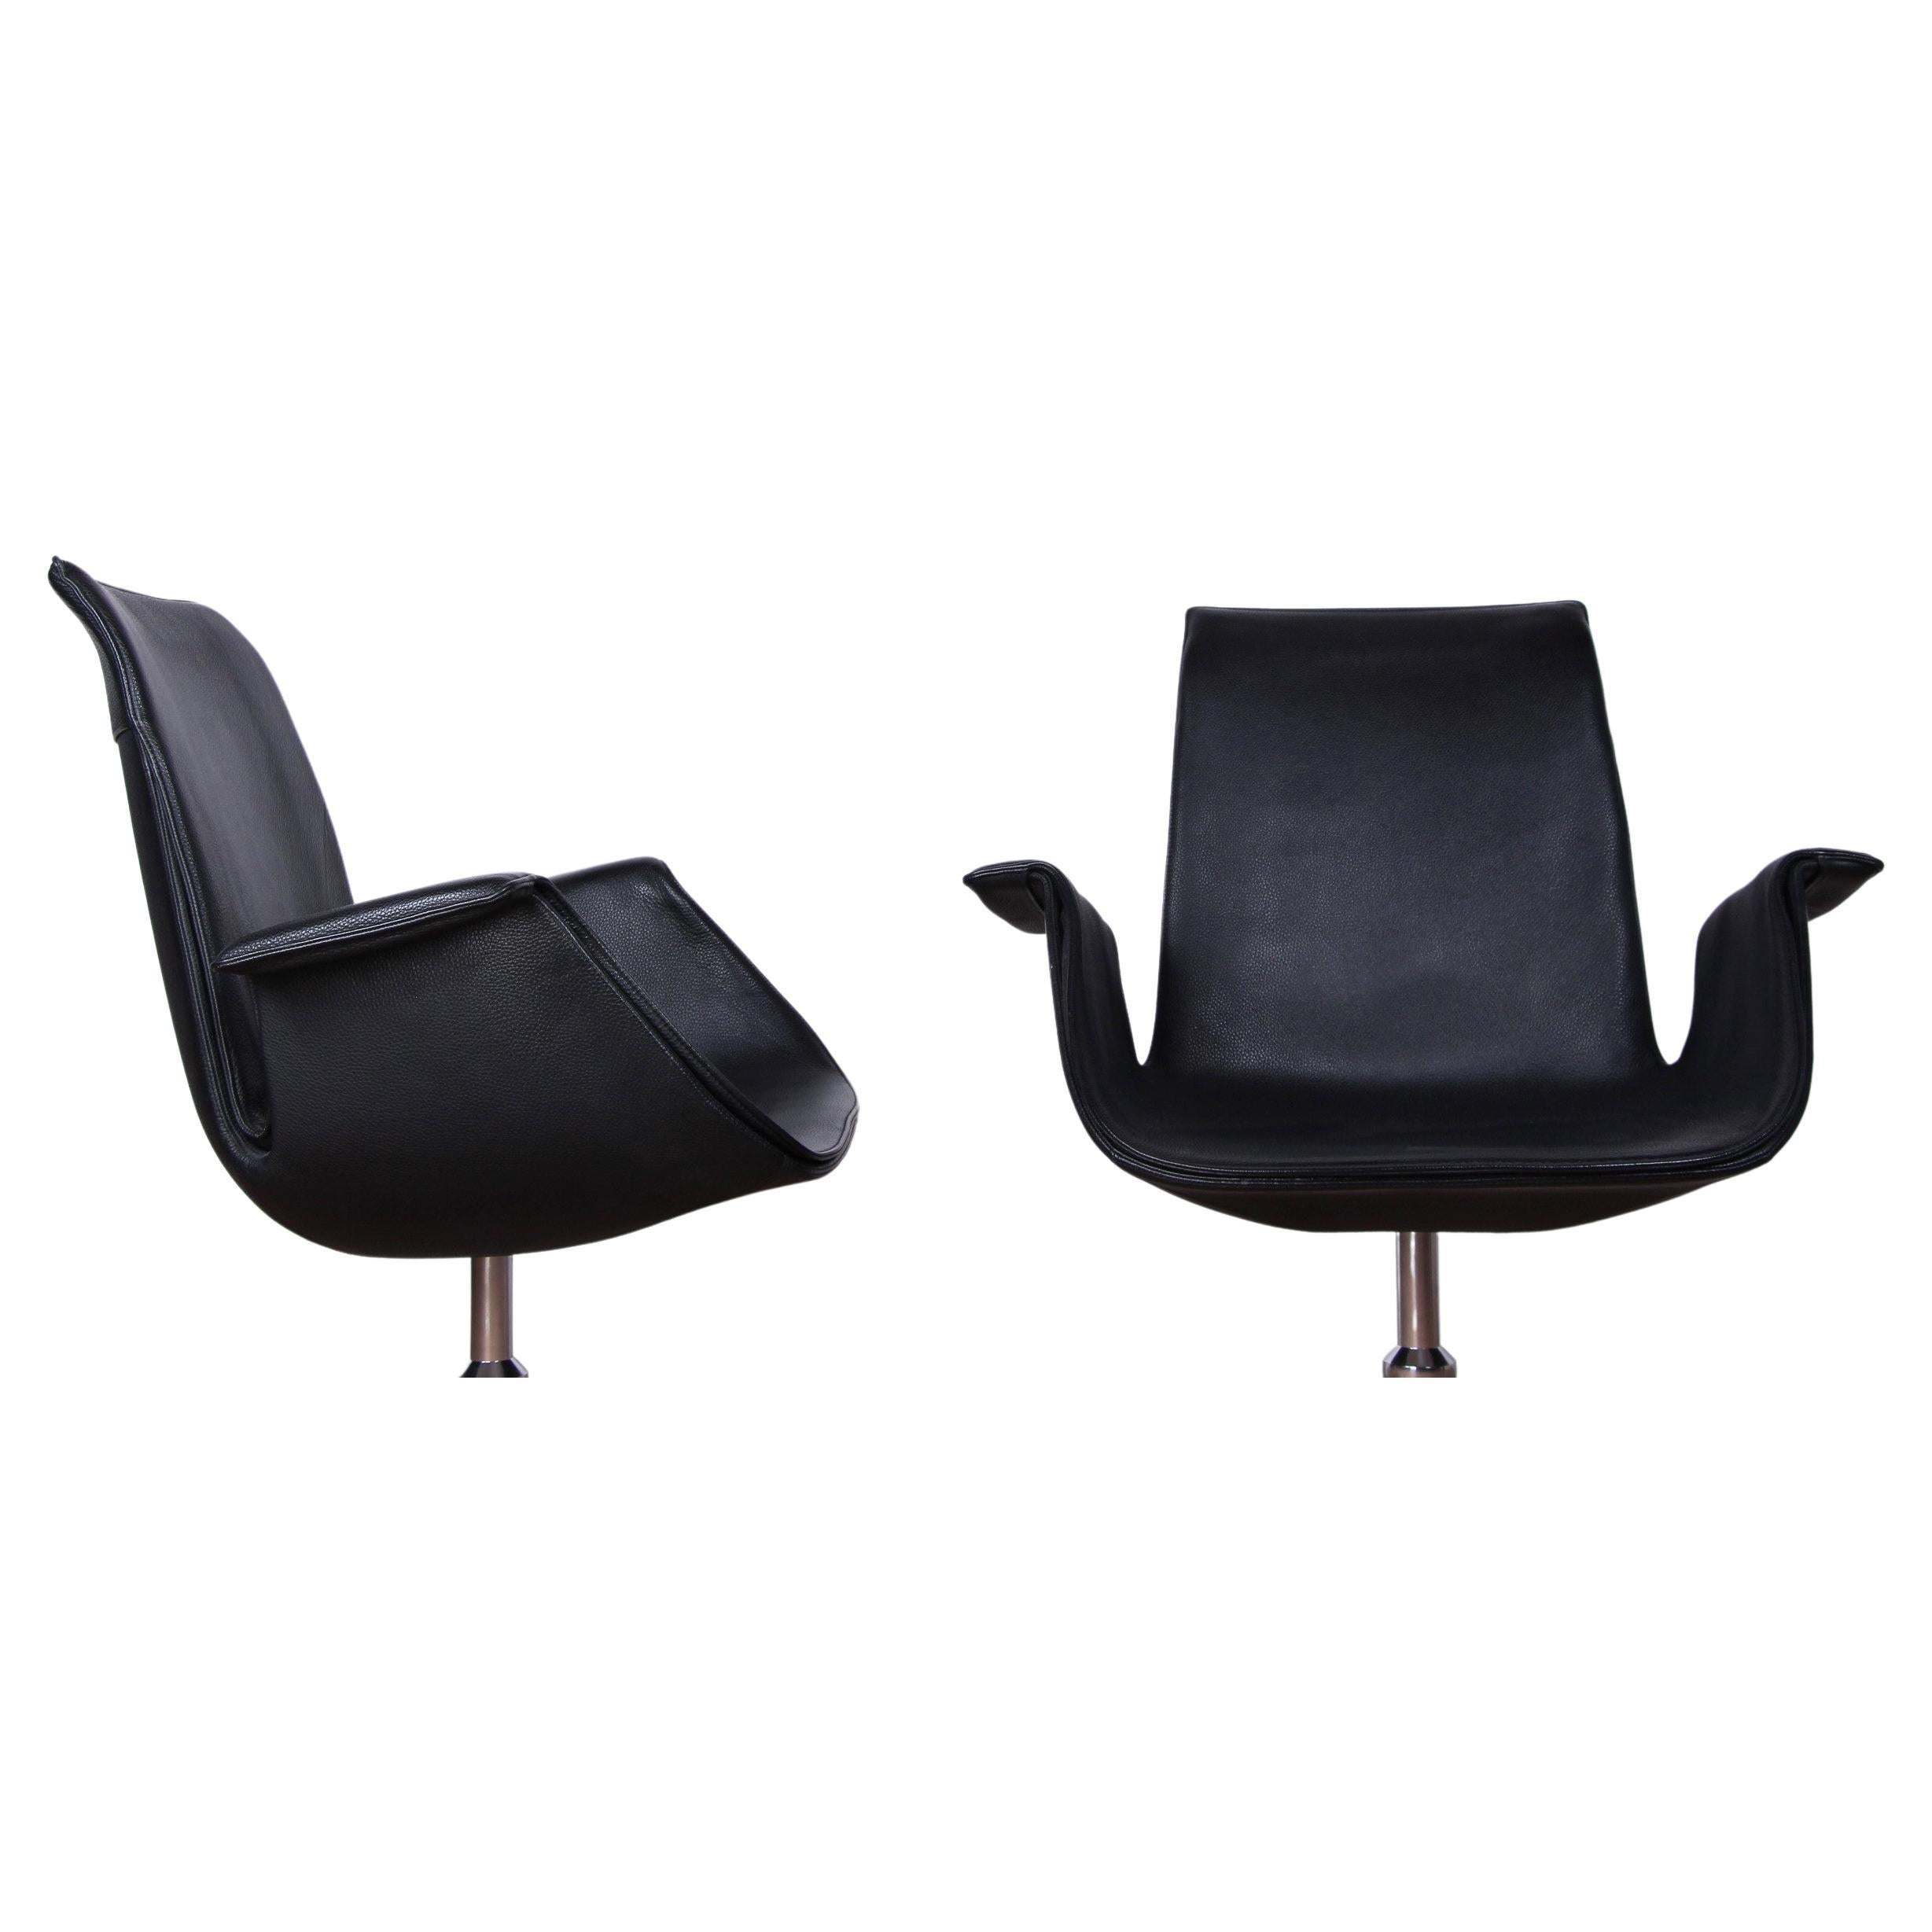 Pair of Danish Armchairs in Leather and Steel, Model FK 6725 by Preben Fabricius